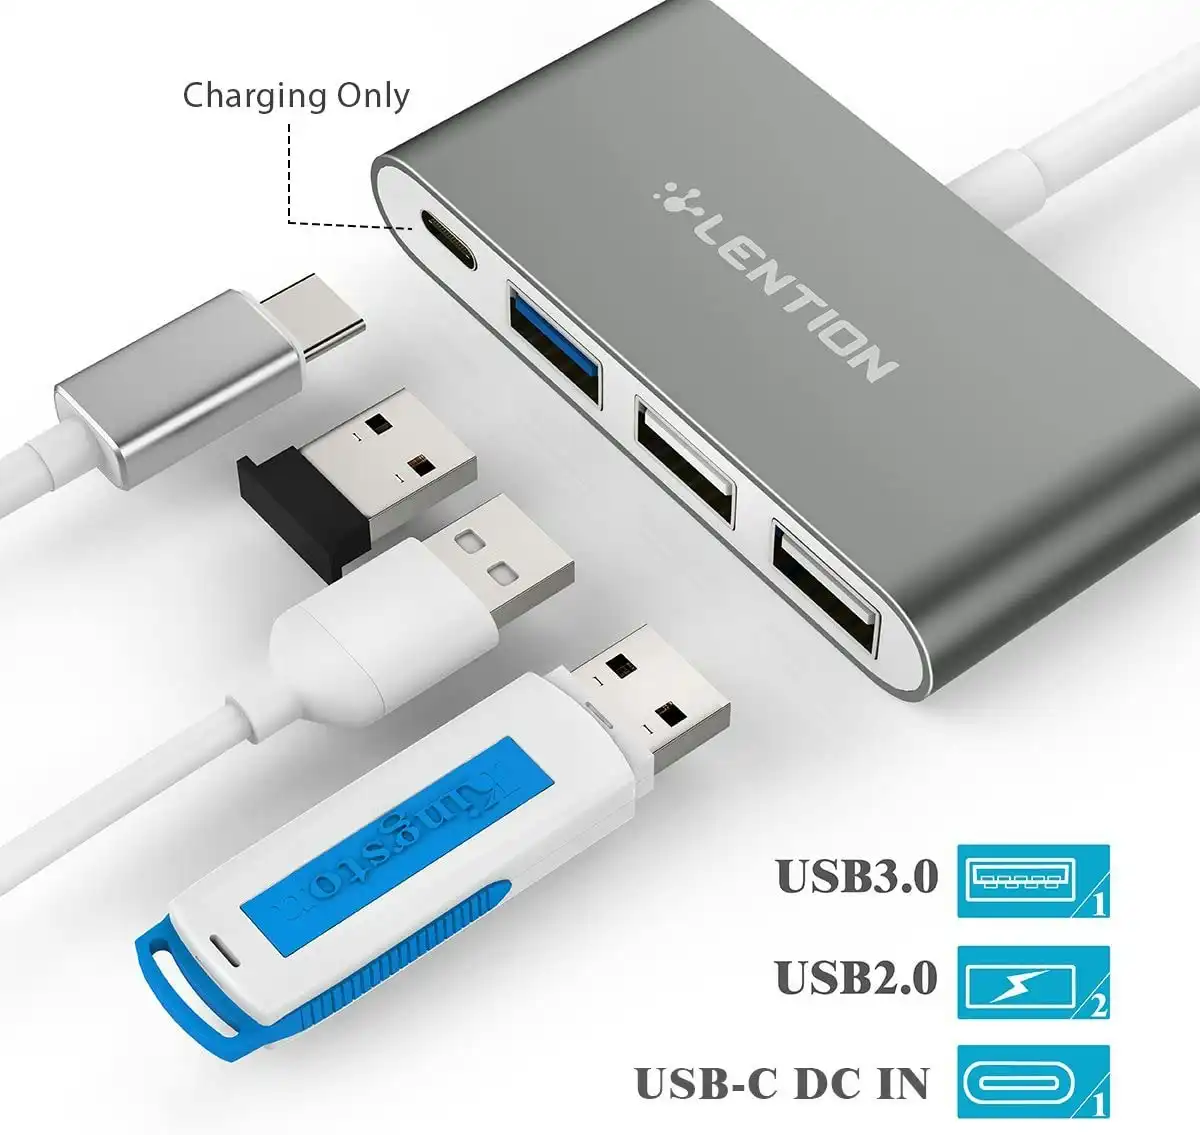 LENTION 4-in-1 USB-C Hub with Type C, USB 3.0, USB 2.0 Compatible 2020-2016 MacBook Pro 13/15/16, New Mac Air/Surface, ChromeBook, More, Multiport Cha